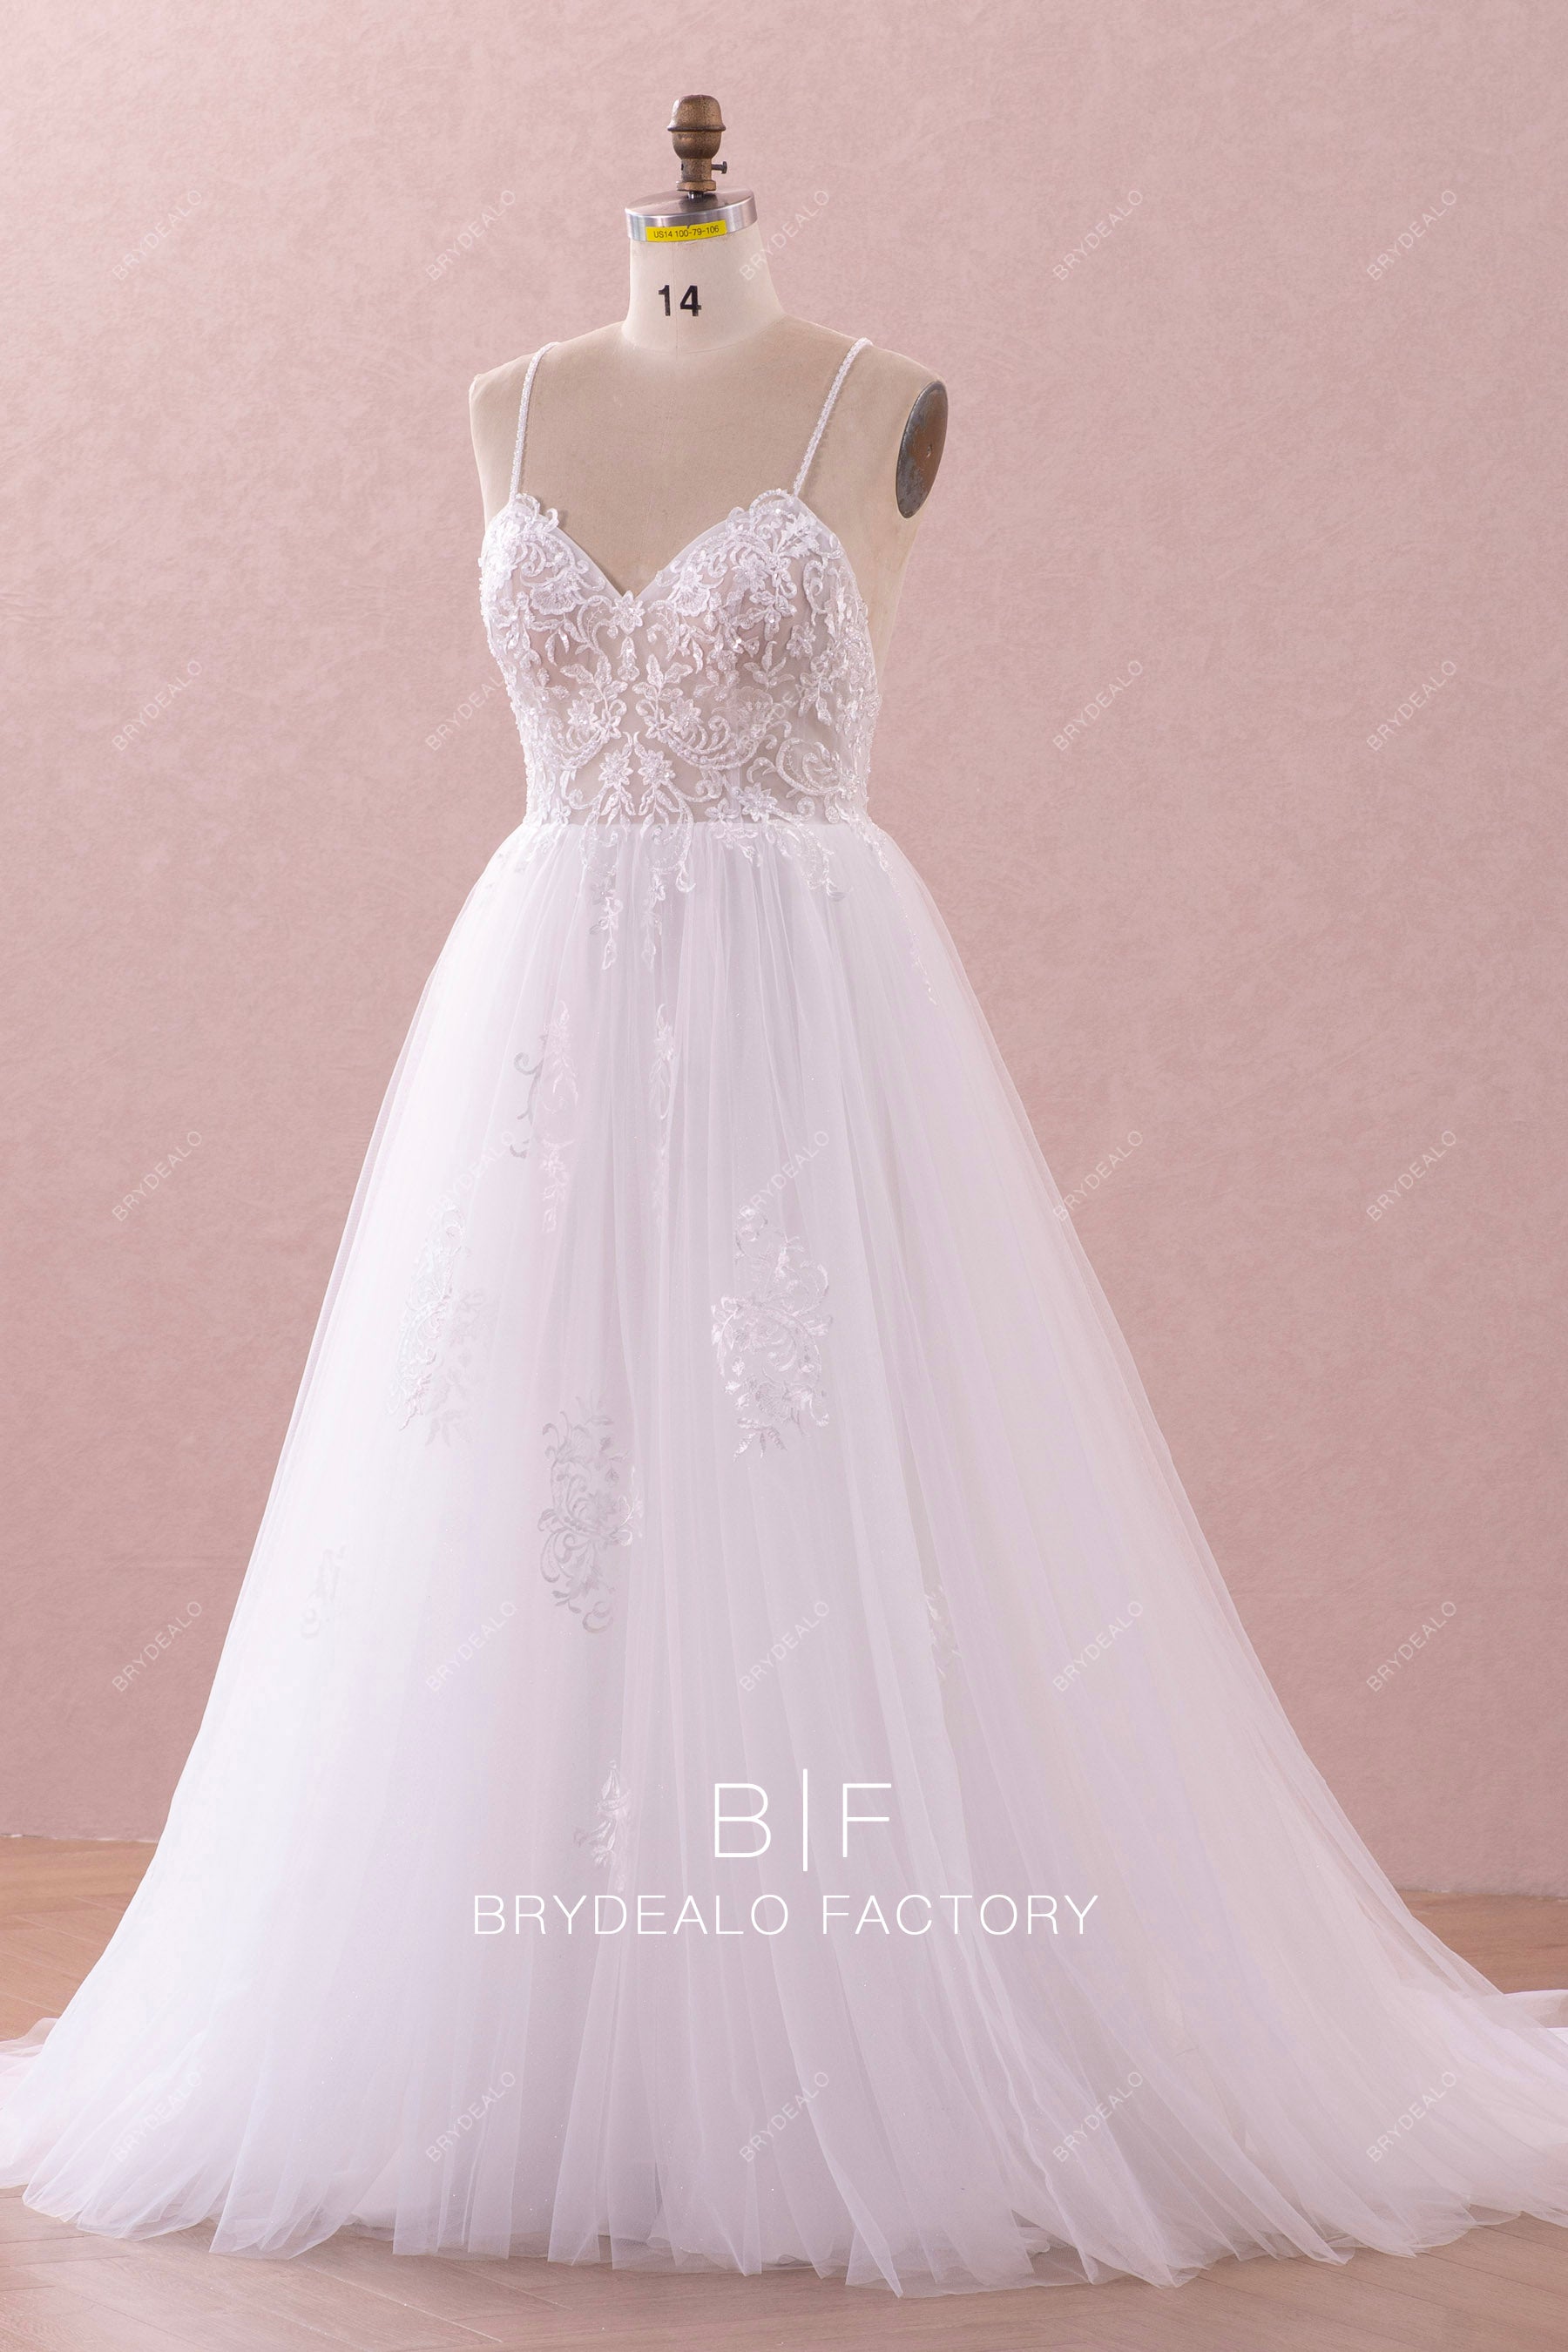 shimmery lace tulle wedding gown